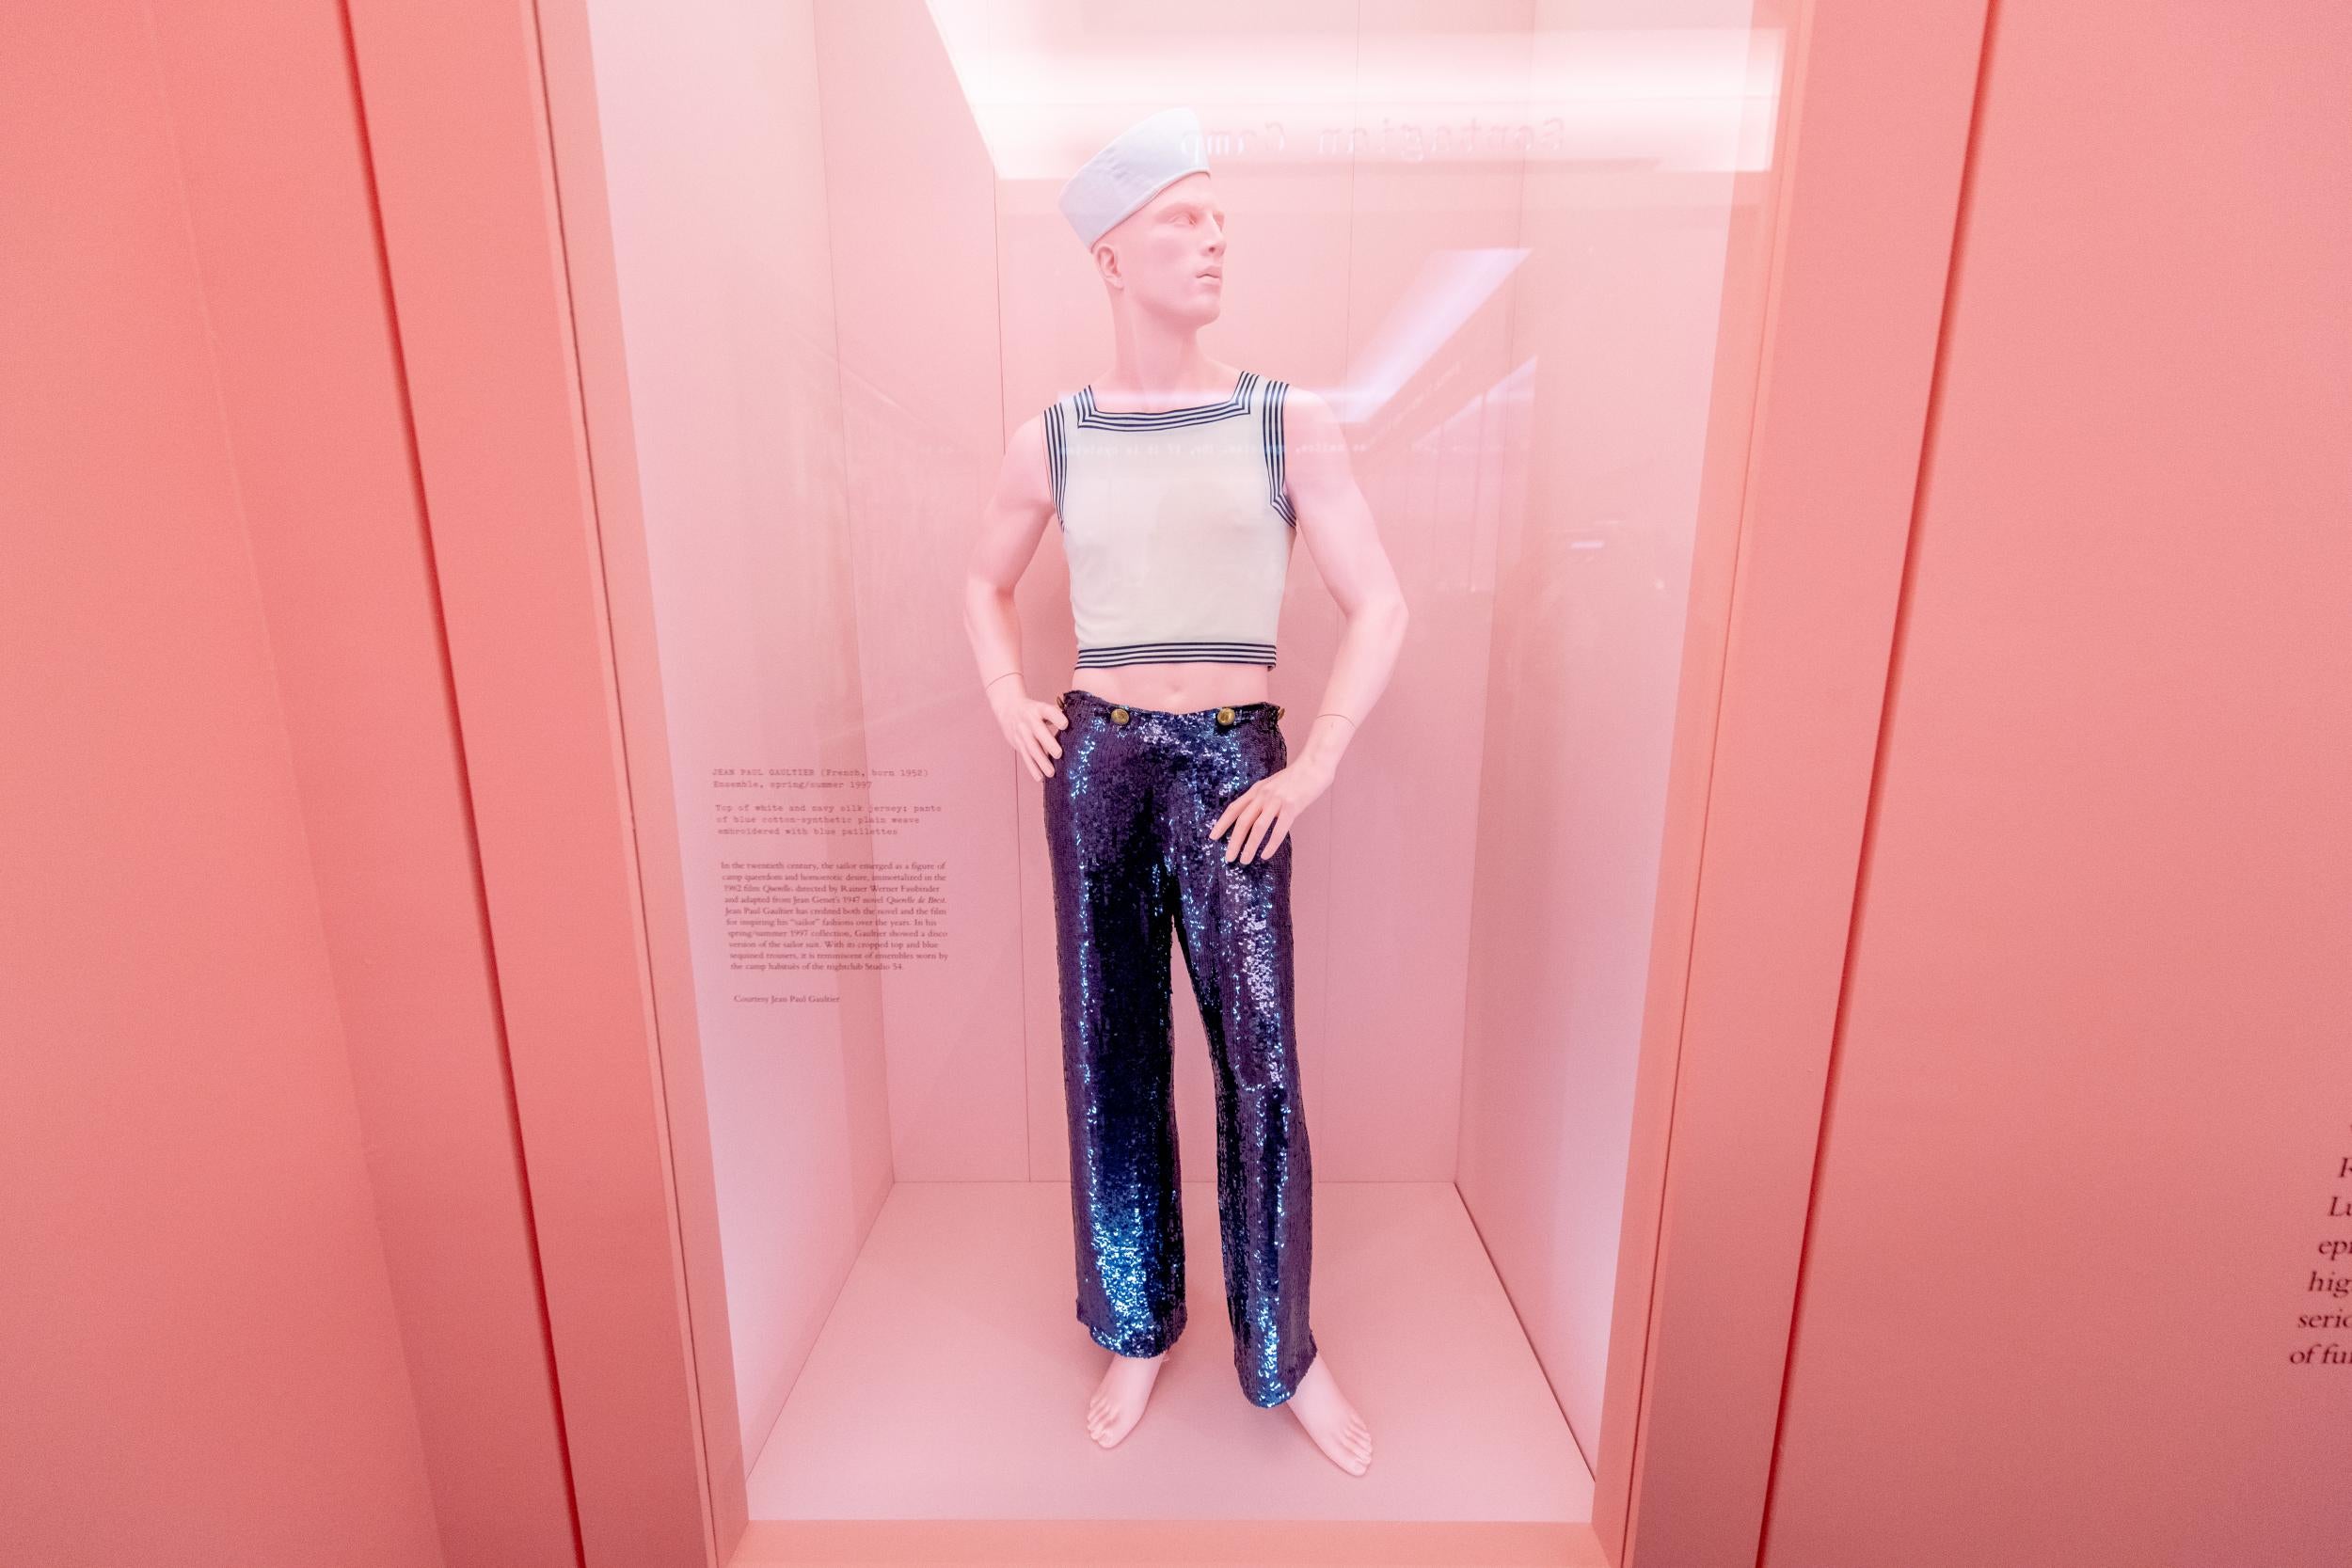 Jean-Paul Gaultier’s iconic sailor is reinvented in this disco version from 1997, complete with sequined trousers and a crop top. (Photo by Roy Rochlin/Getty Images)